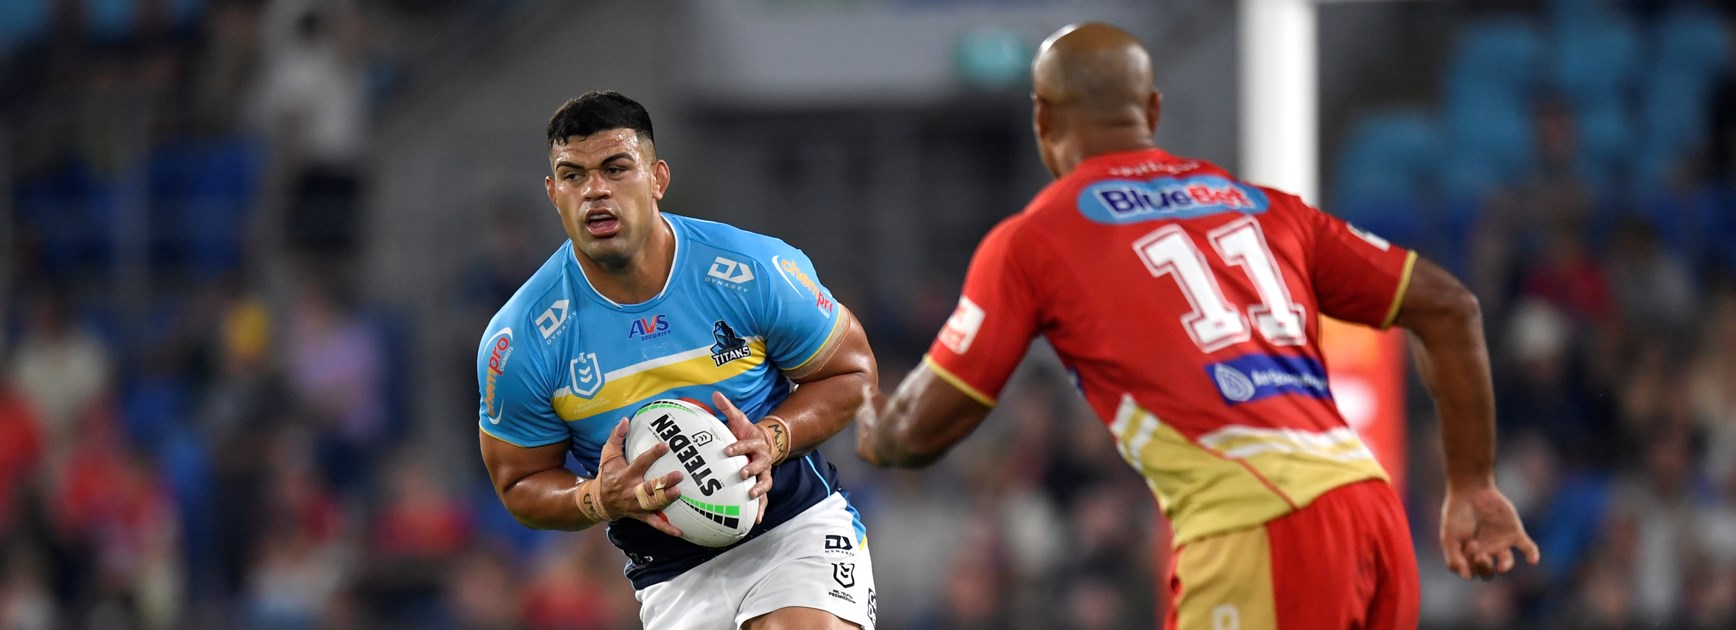 Mixed emotions as Fifita makes successful return